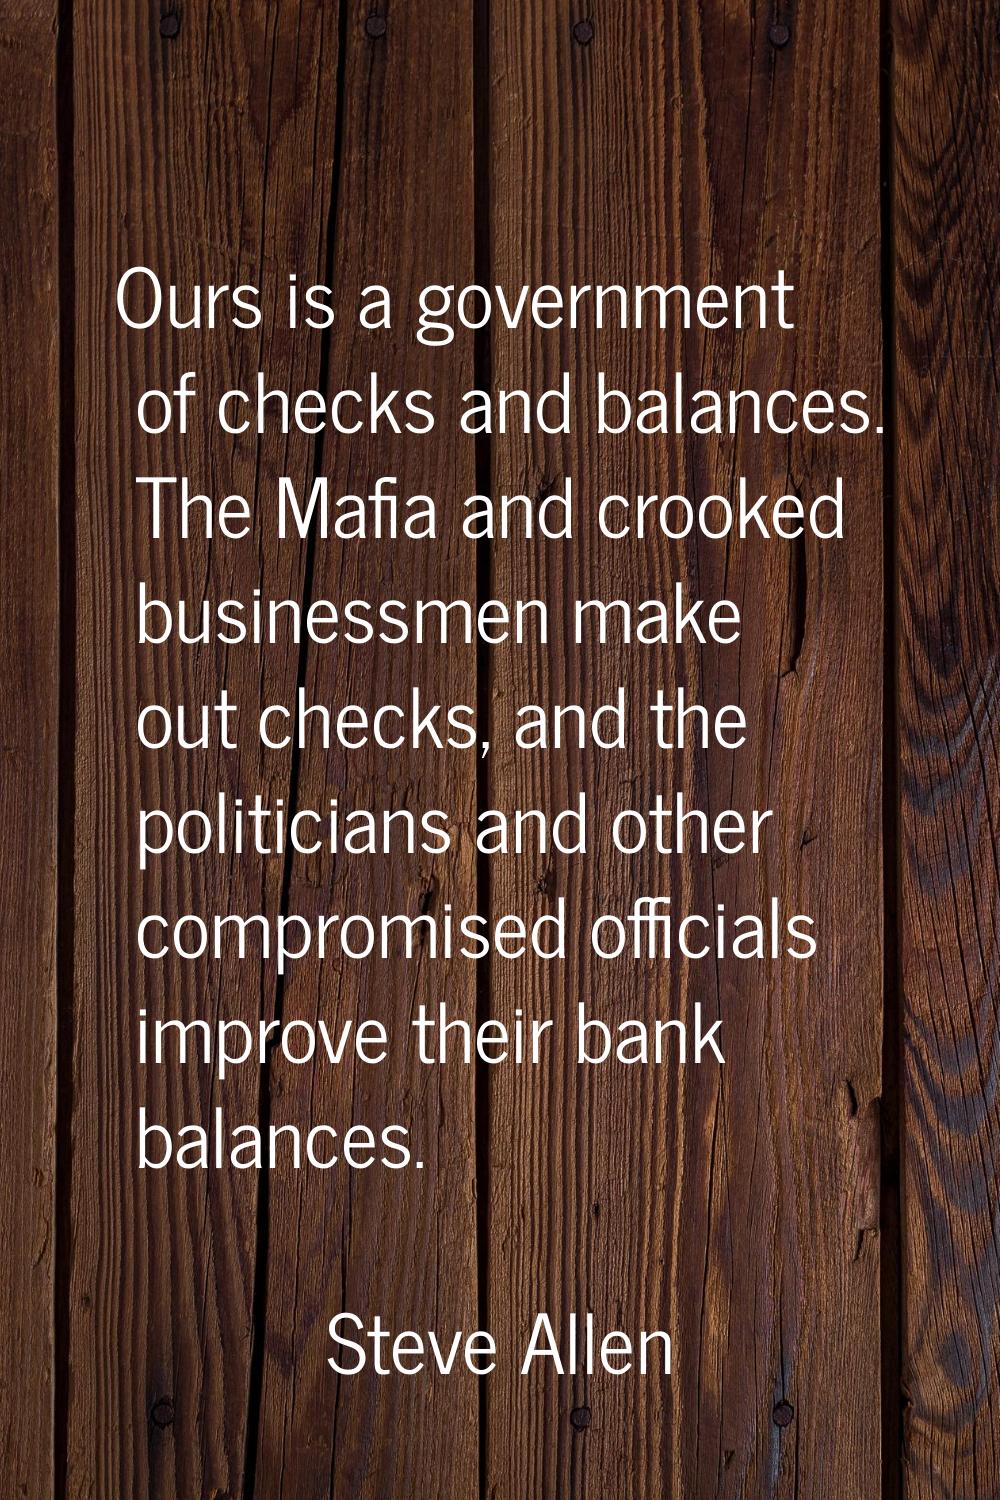 Ours is a government of checks and balances. The Mafia and crooked businessmen make out checks, and